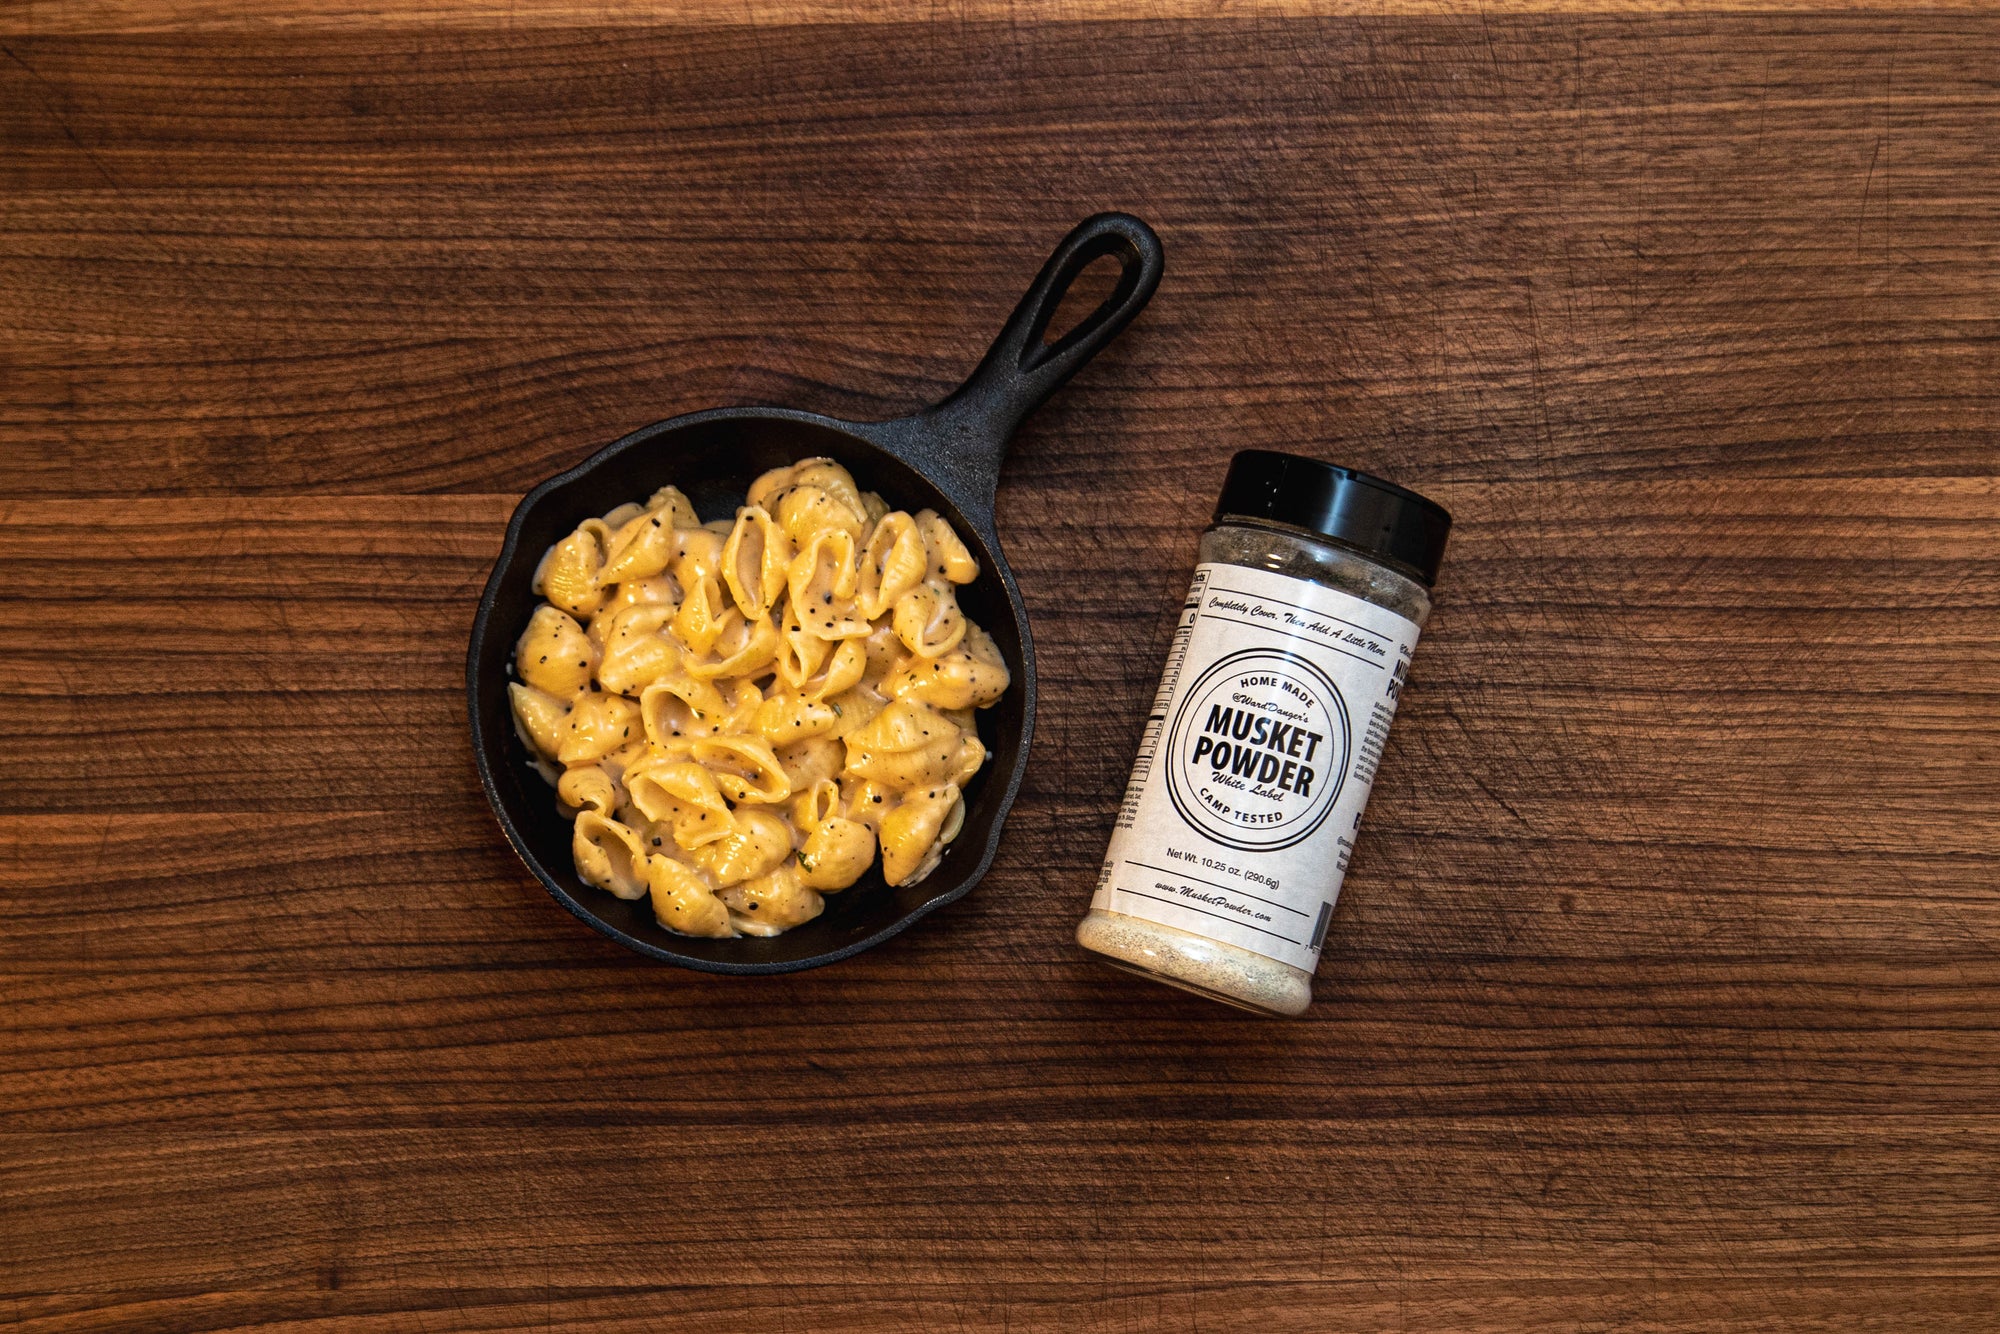 Mac & Cheese with White Label Musket Powder